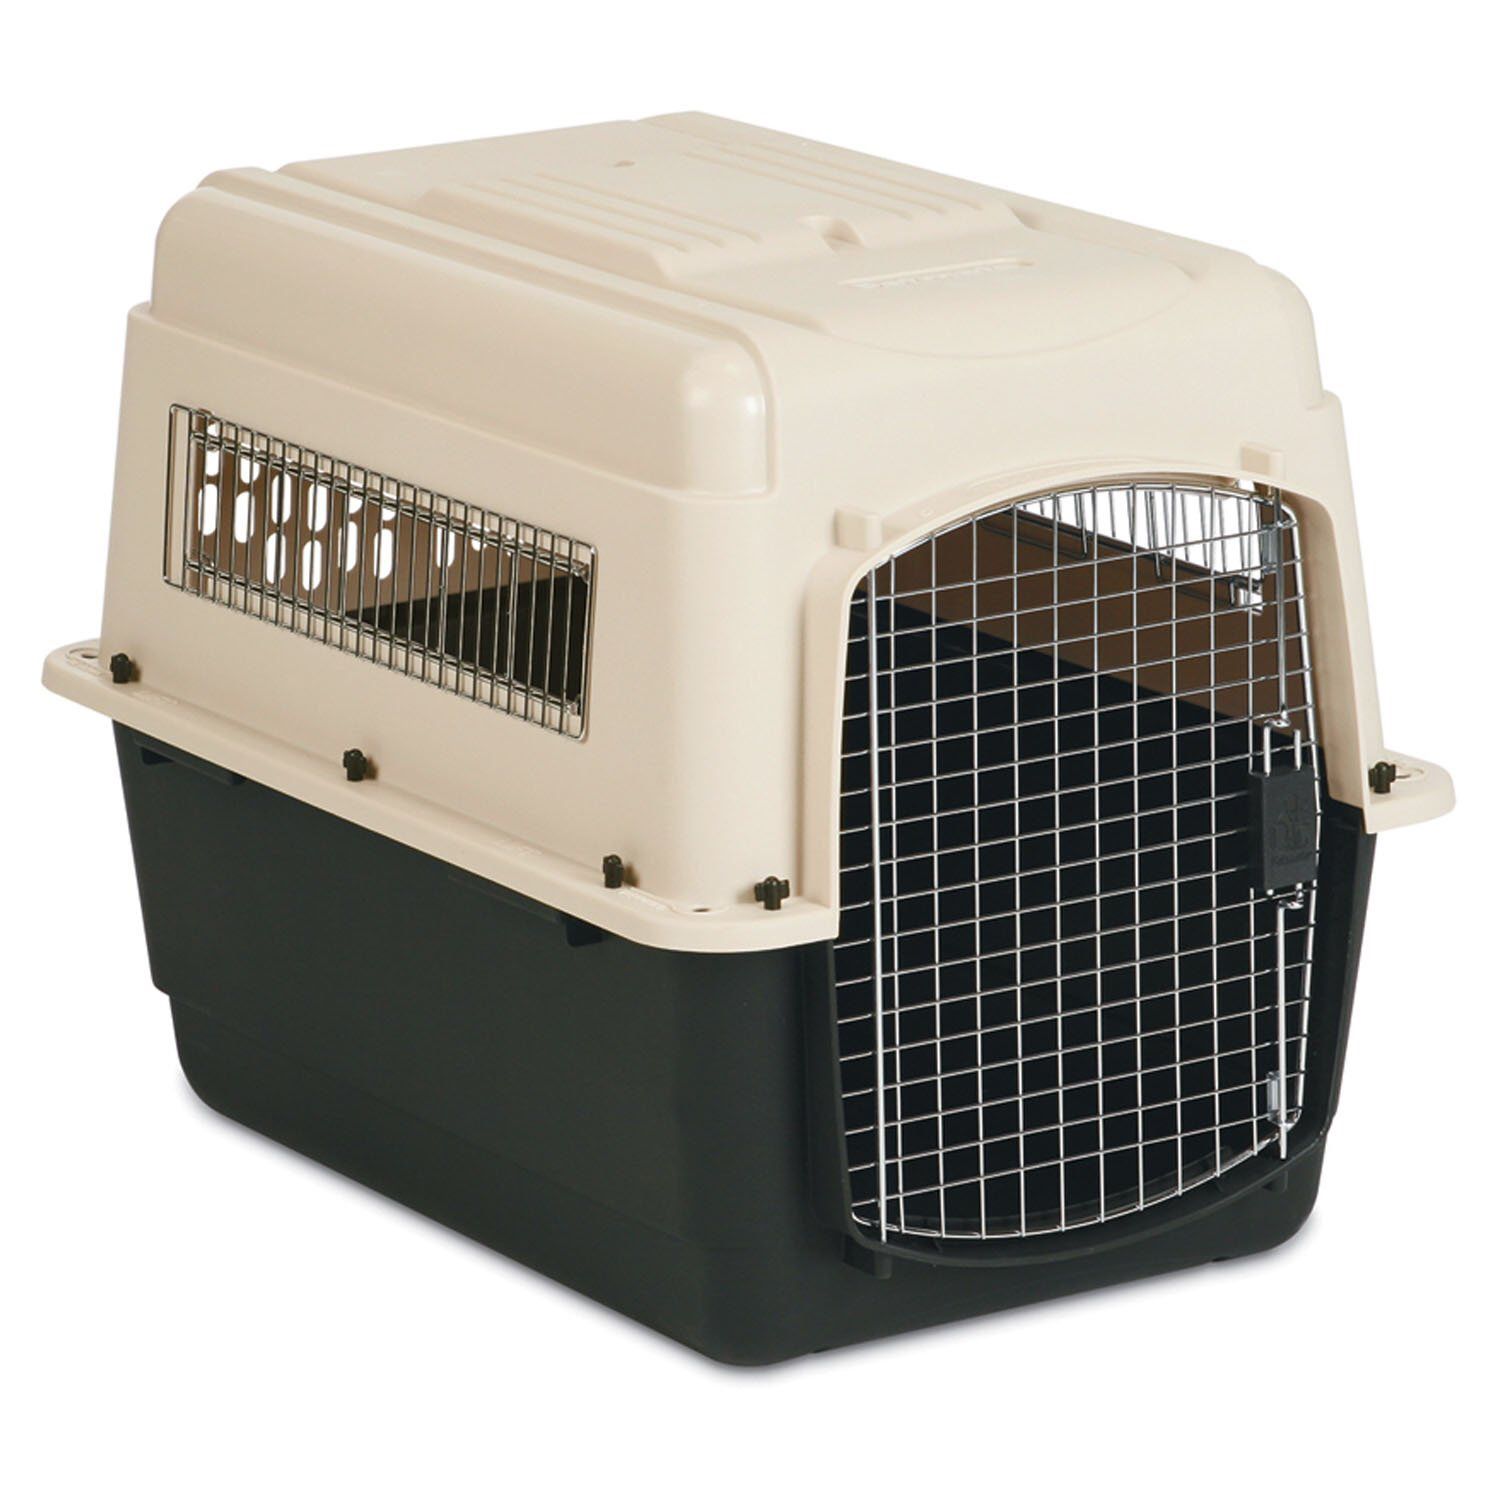 Excellent Condition Airline-approved Dog Kennel (Series 500, 40”)